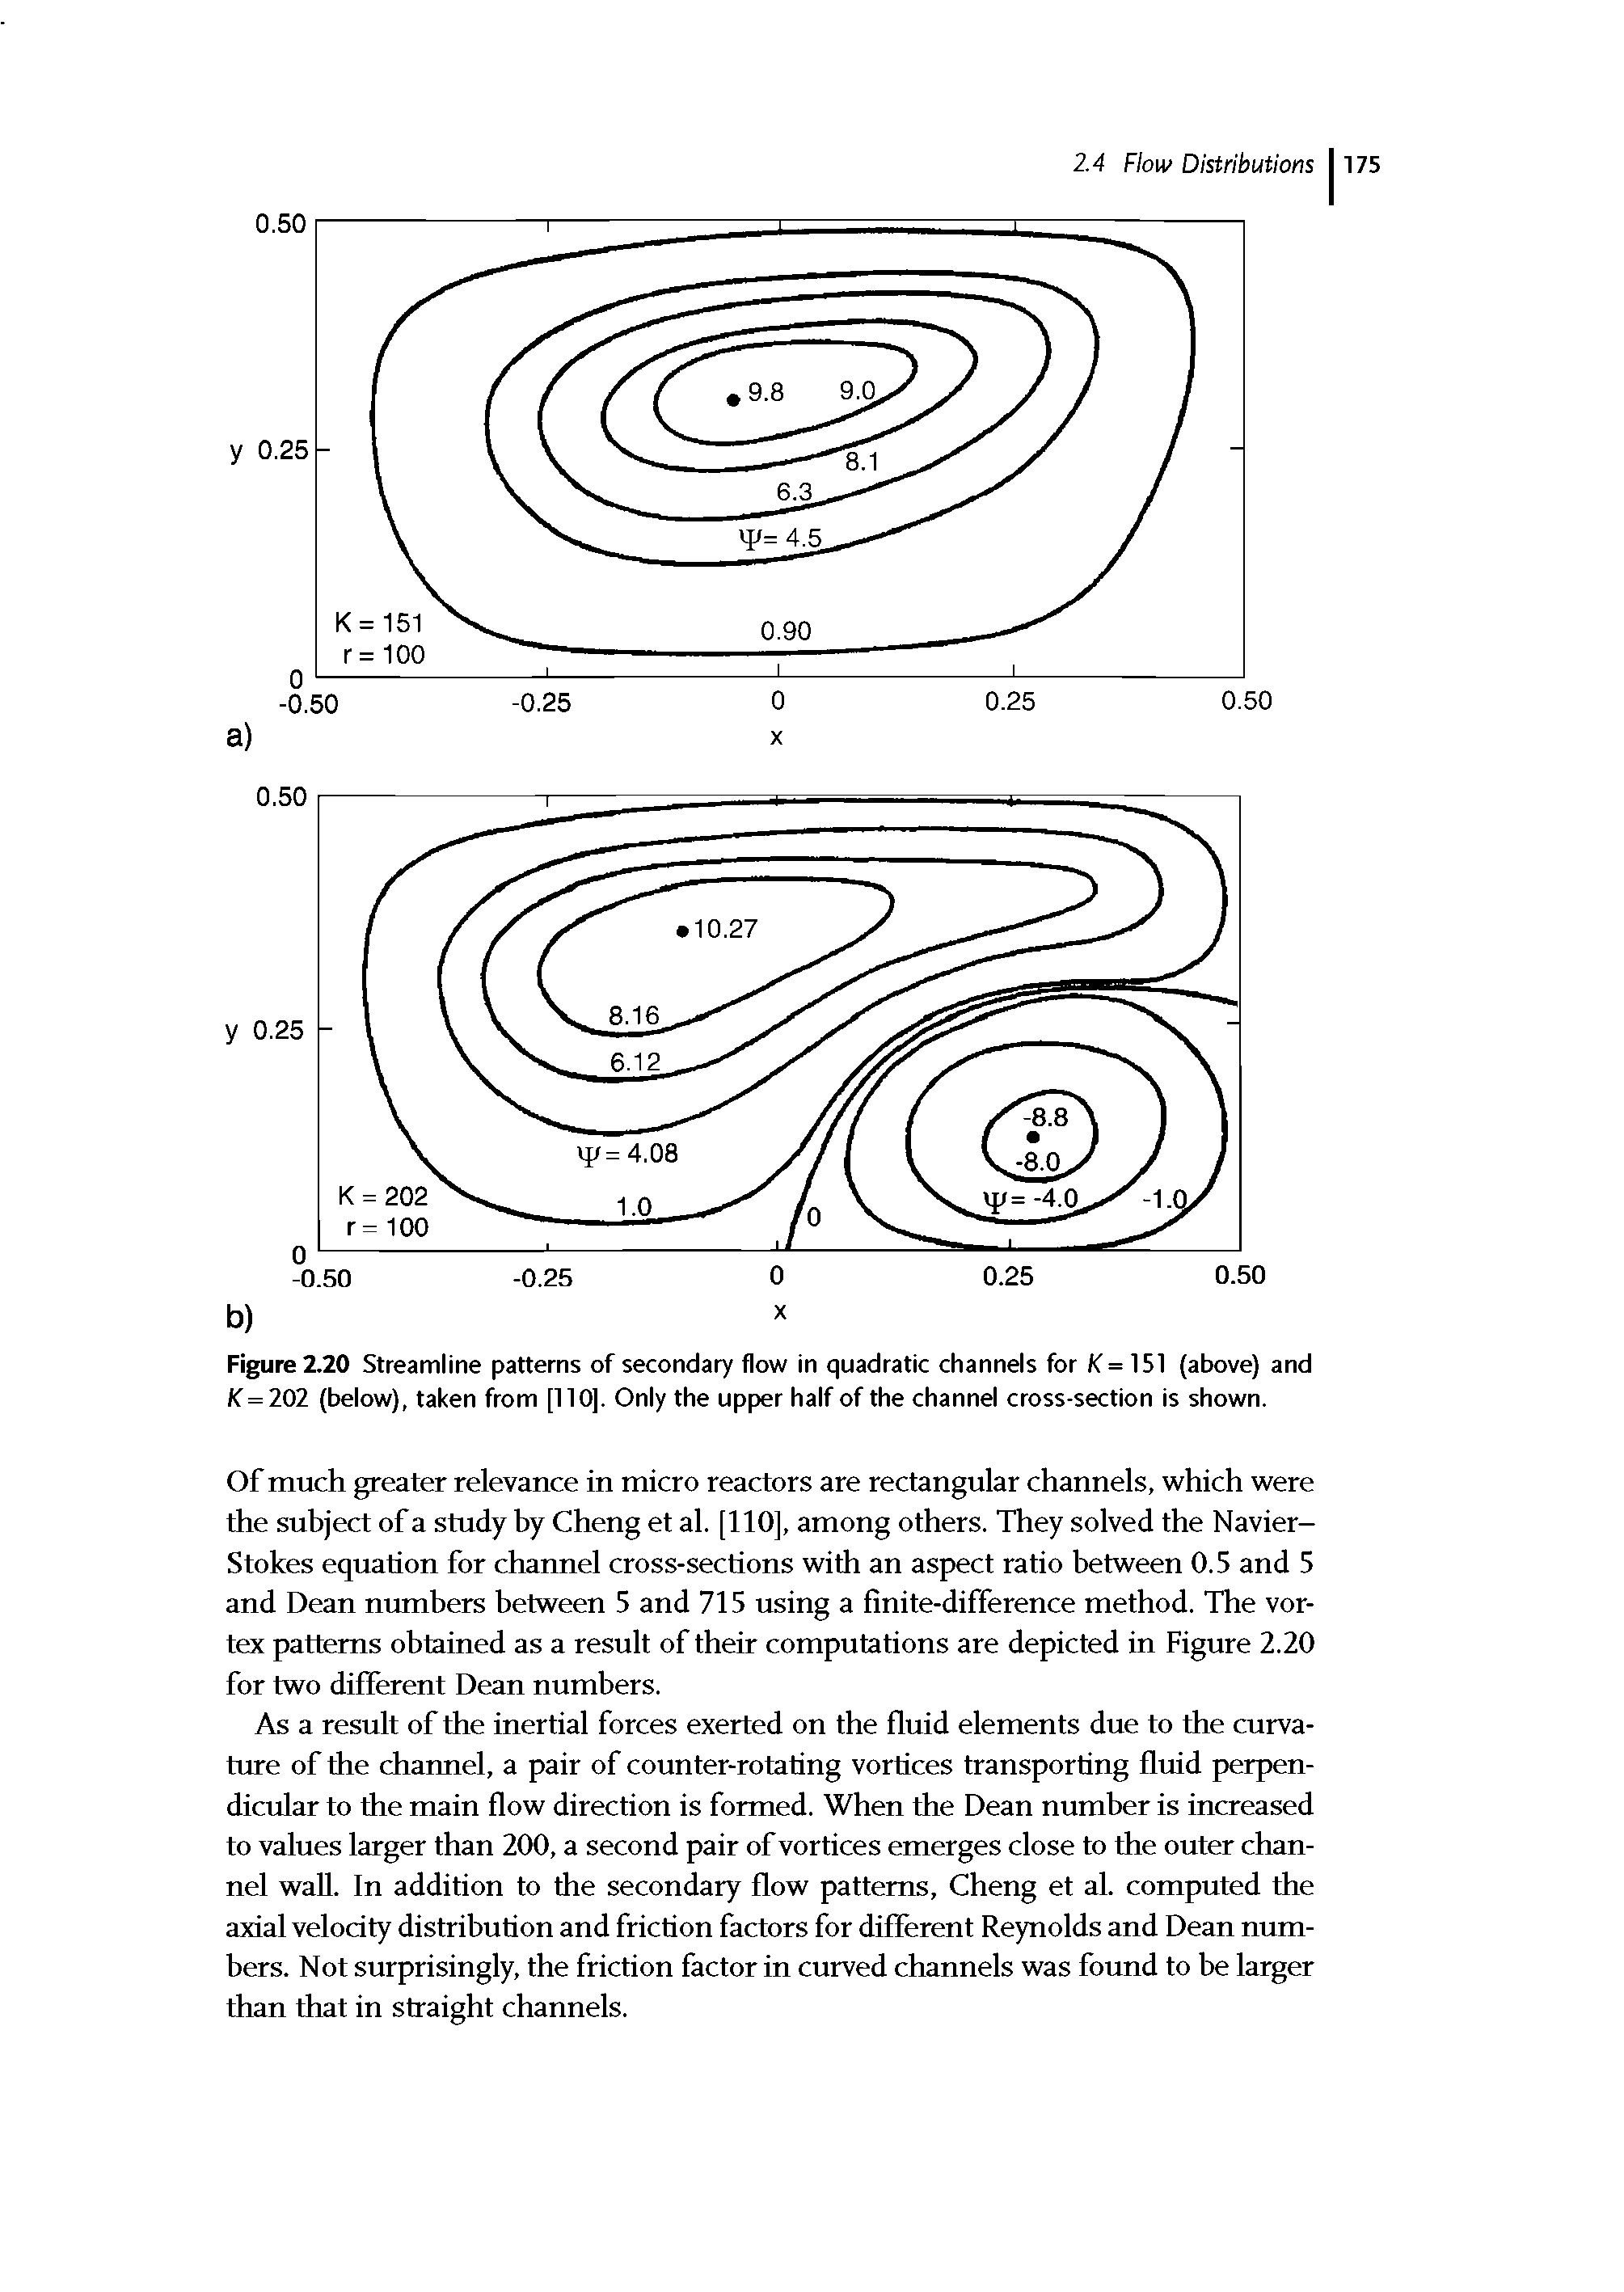 Figure 2.20 Streamline patterns of secondary flow in quadratic channels for fC=151 (above) and K = 202 (below), taken from [110]. Only the upper half of the channel cross-section is shown.